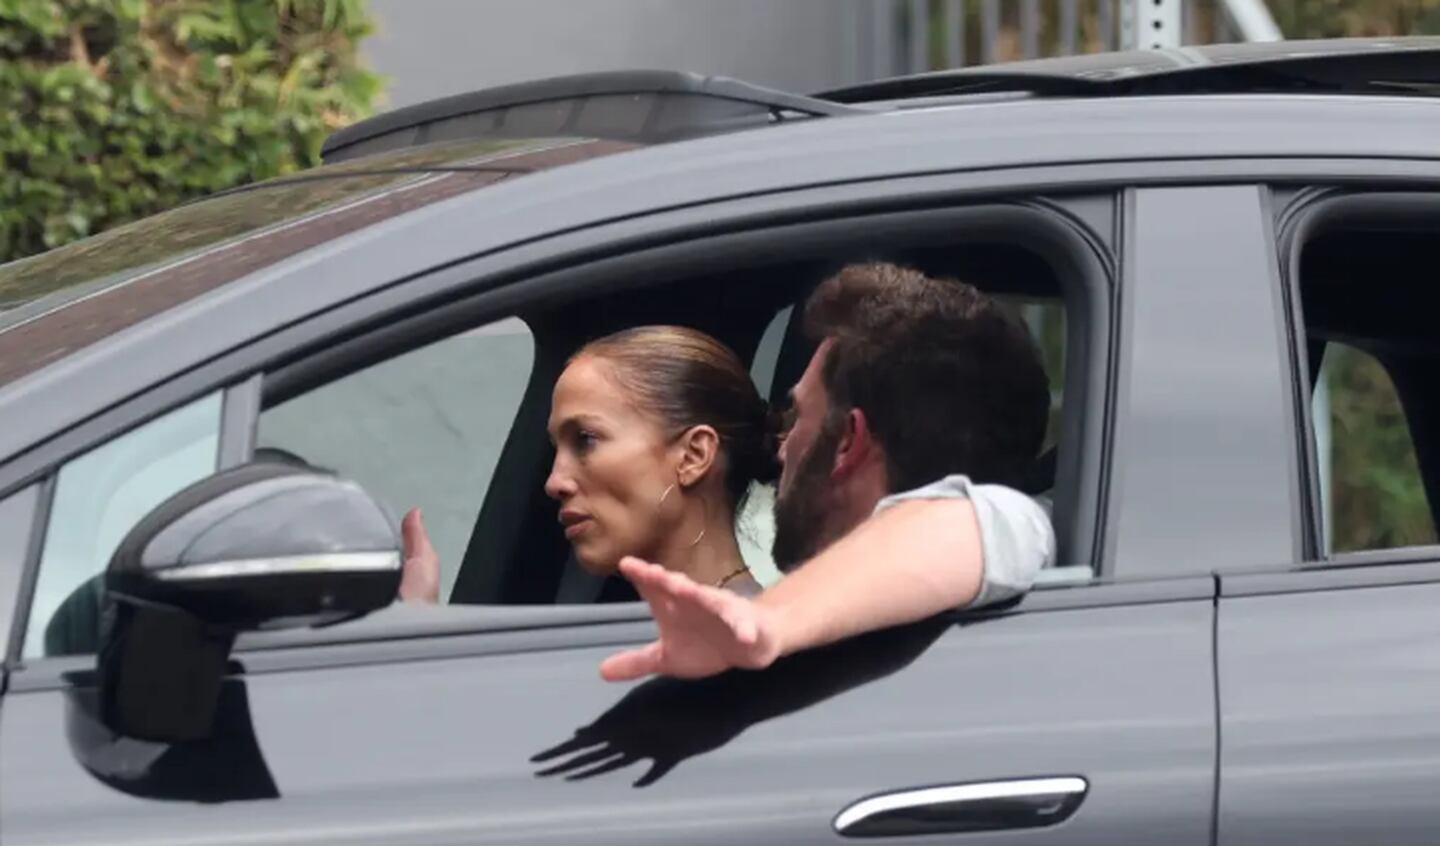 Jennifer Lopez and Ben Affleck are apparently having a discussion inside her van